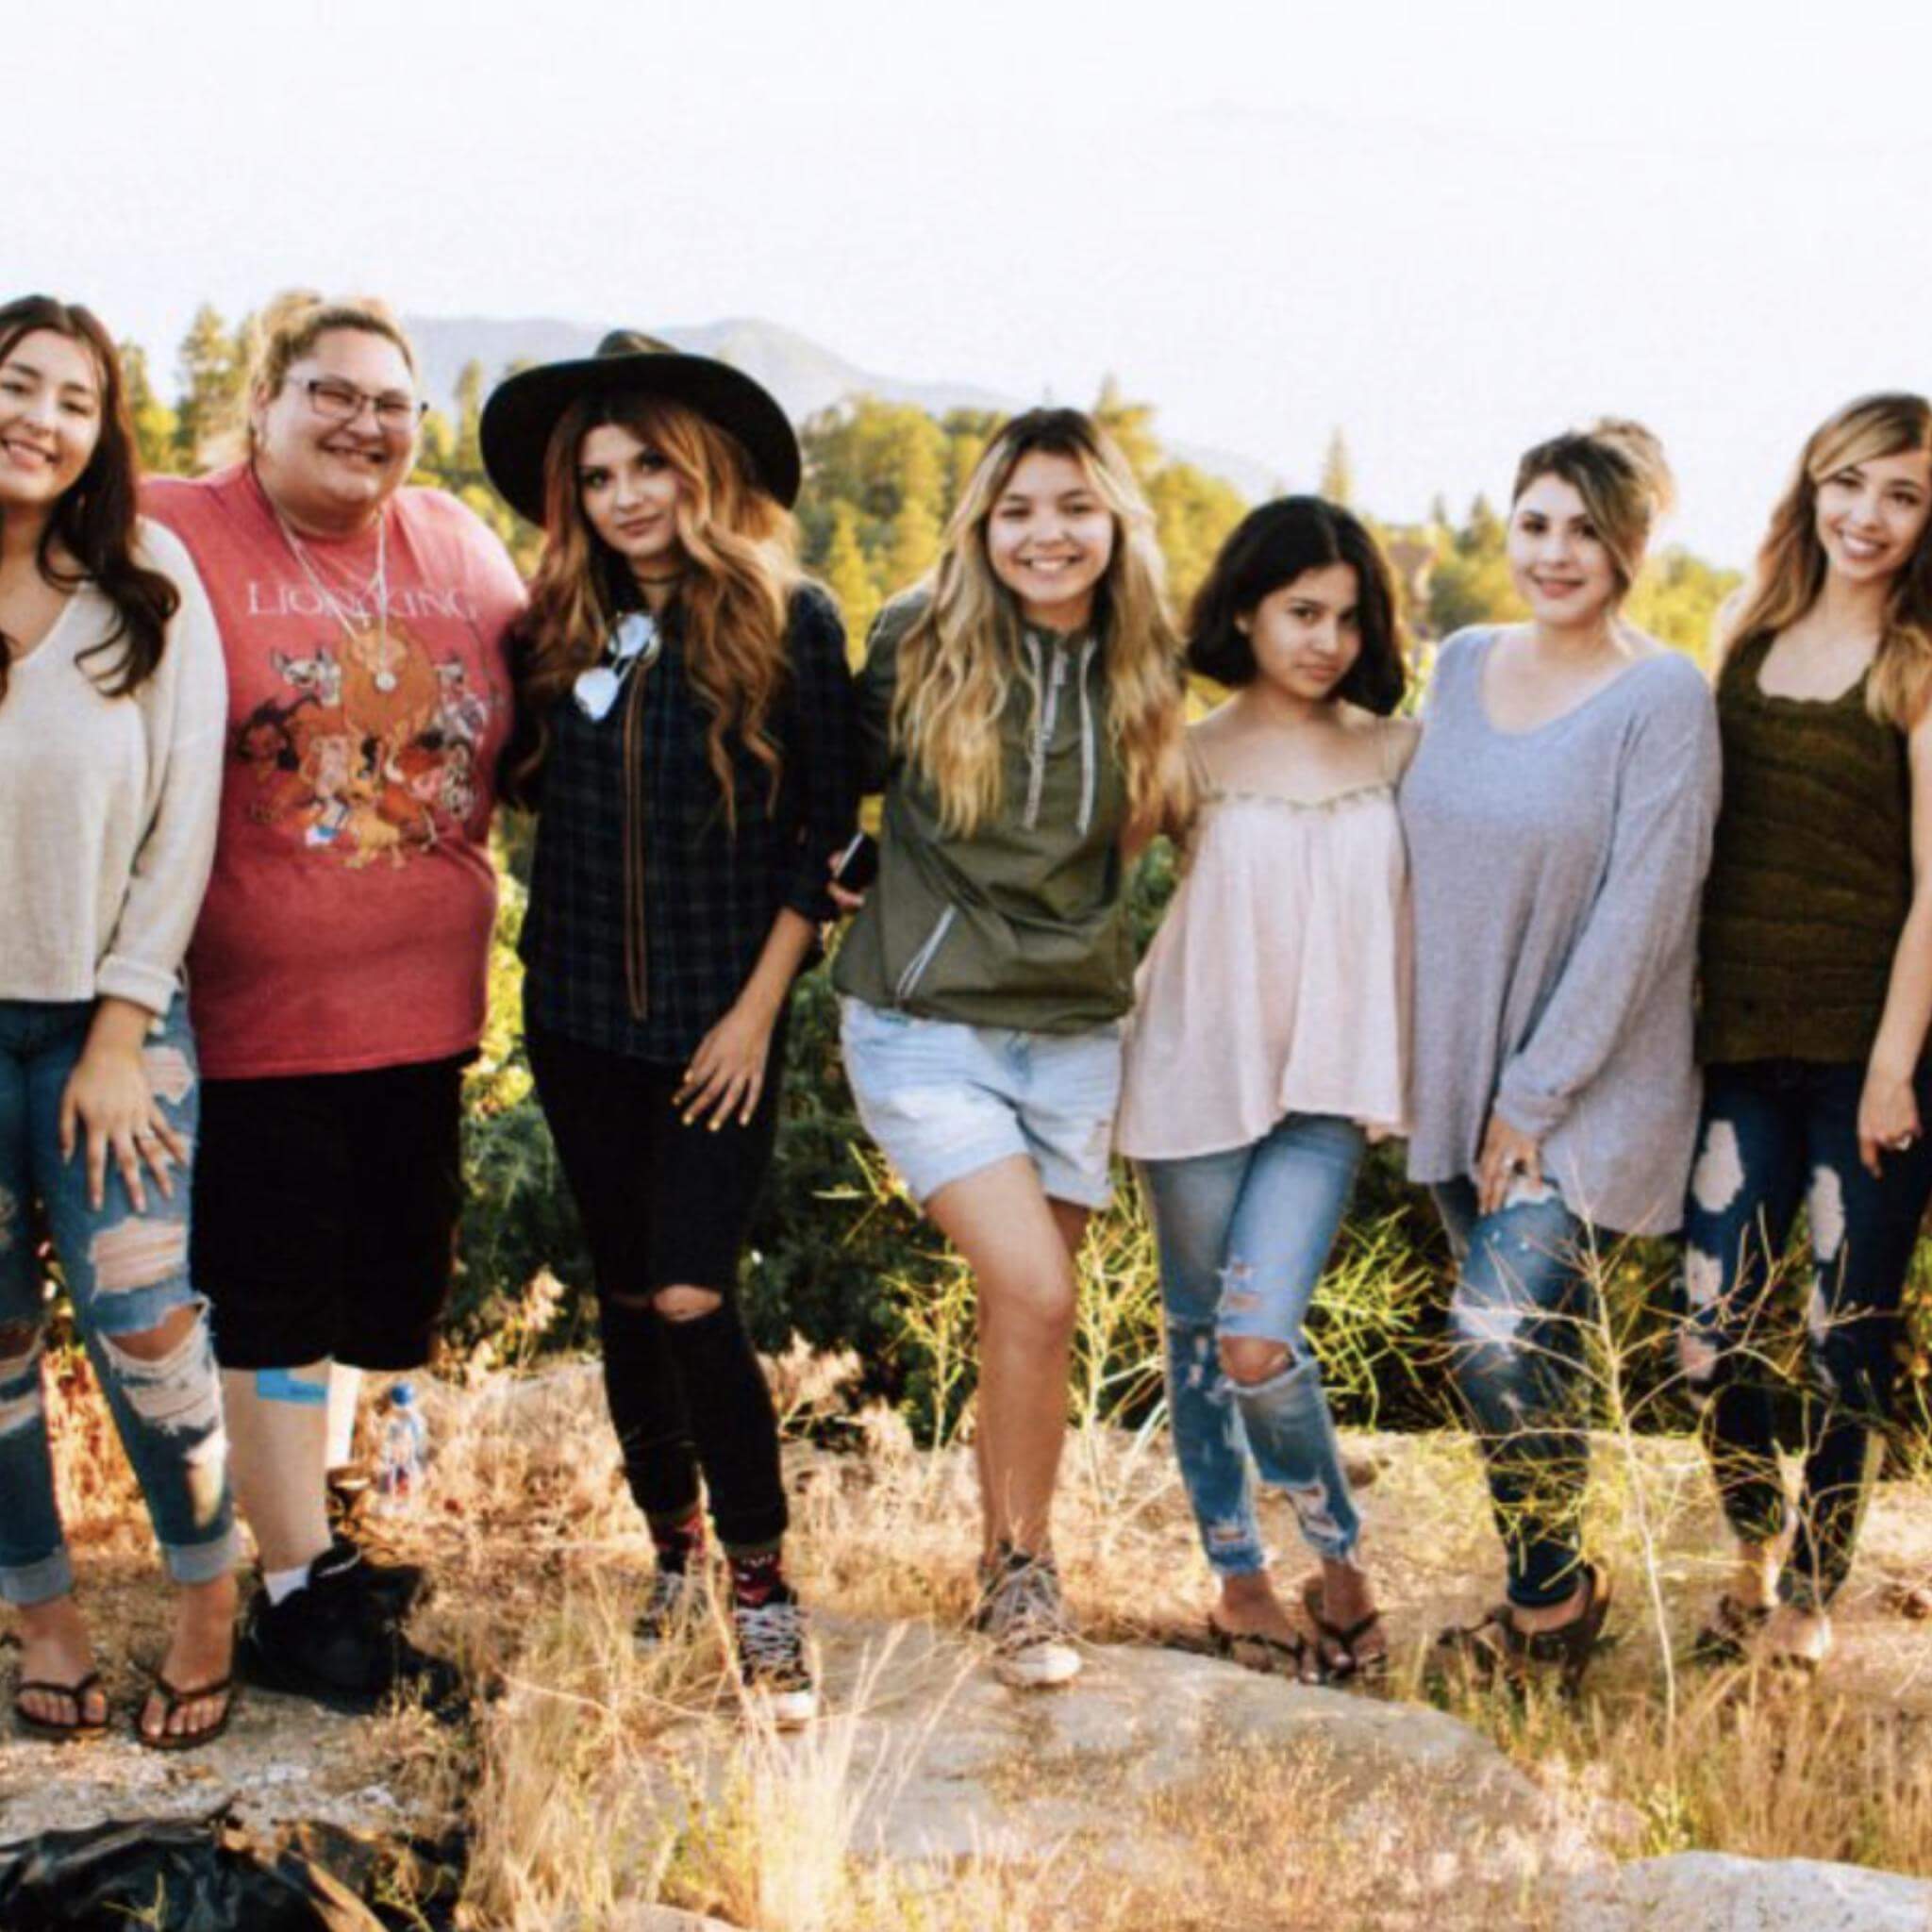 Abingdon Co. Image displays group of diverse young women standing outside in a row in the outdoors smiling